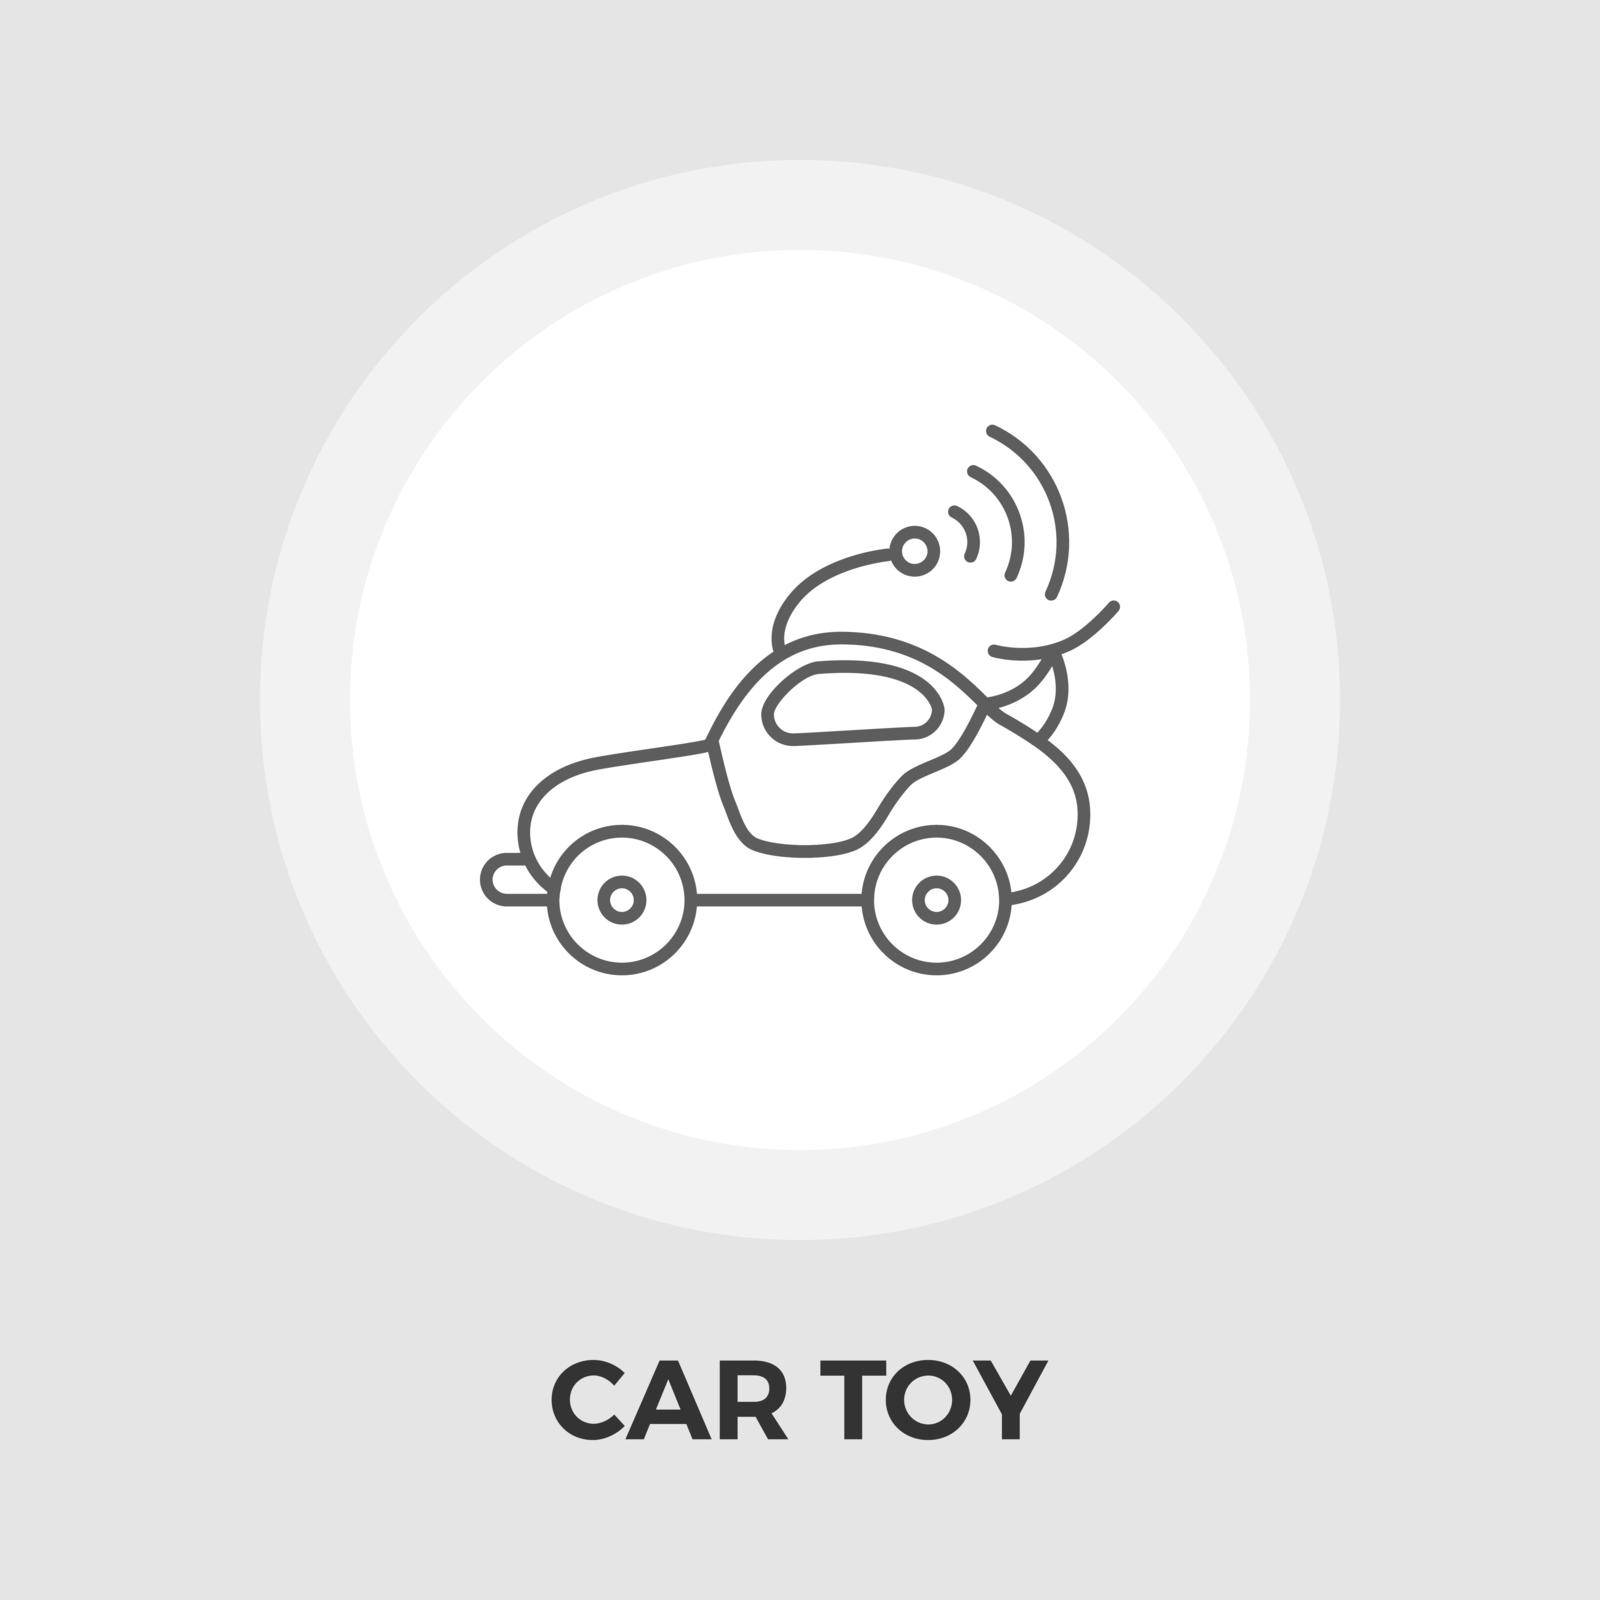 Car toy icon vector. Flat icon isolated on the white background. Editable EPS file. Vector illustration.